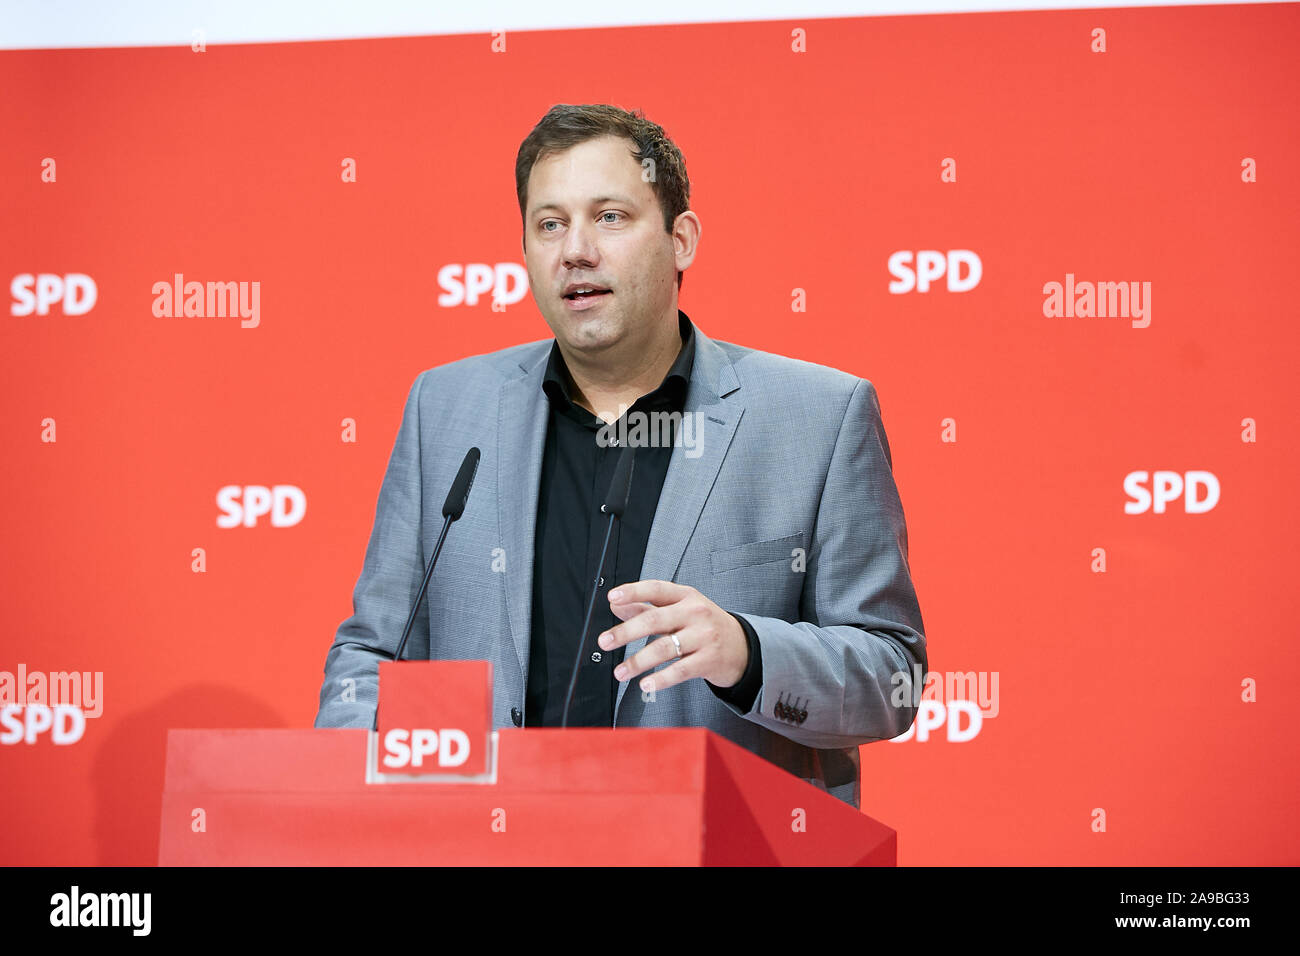 14.10.2019, Berlin, Berlin, Germany - Lars Klingbeil, Secretary General of the SPD at a press conference in the Willy Brandt House. 00R191014D012CAROE Stock Photo